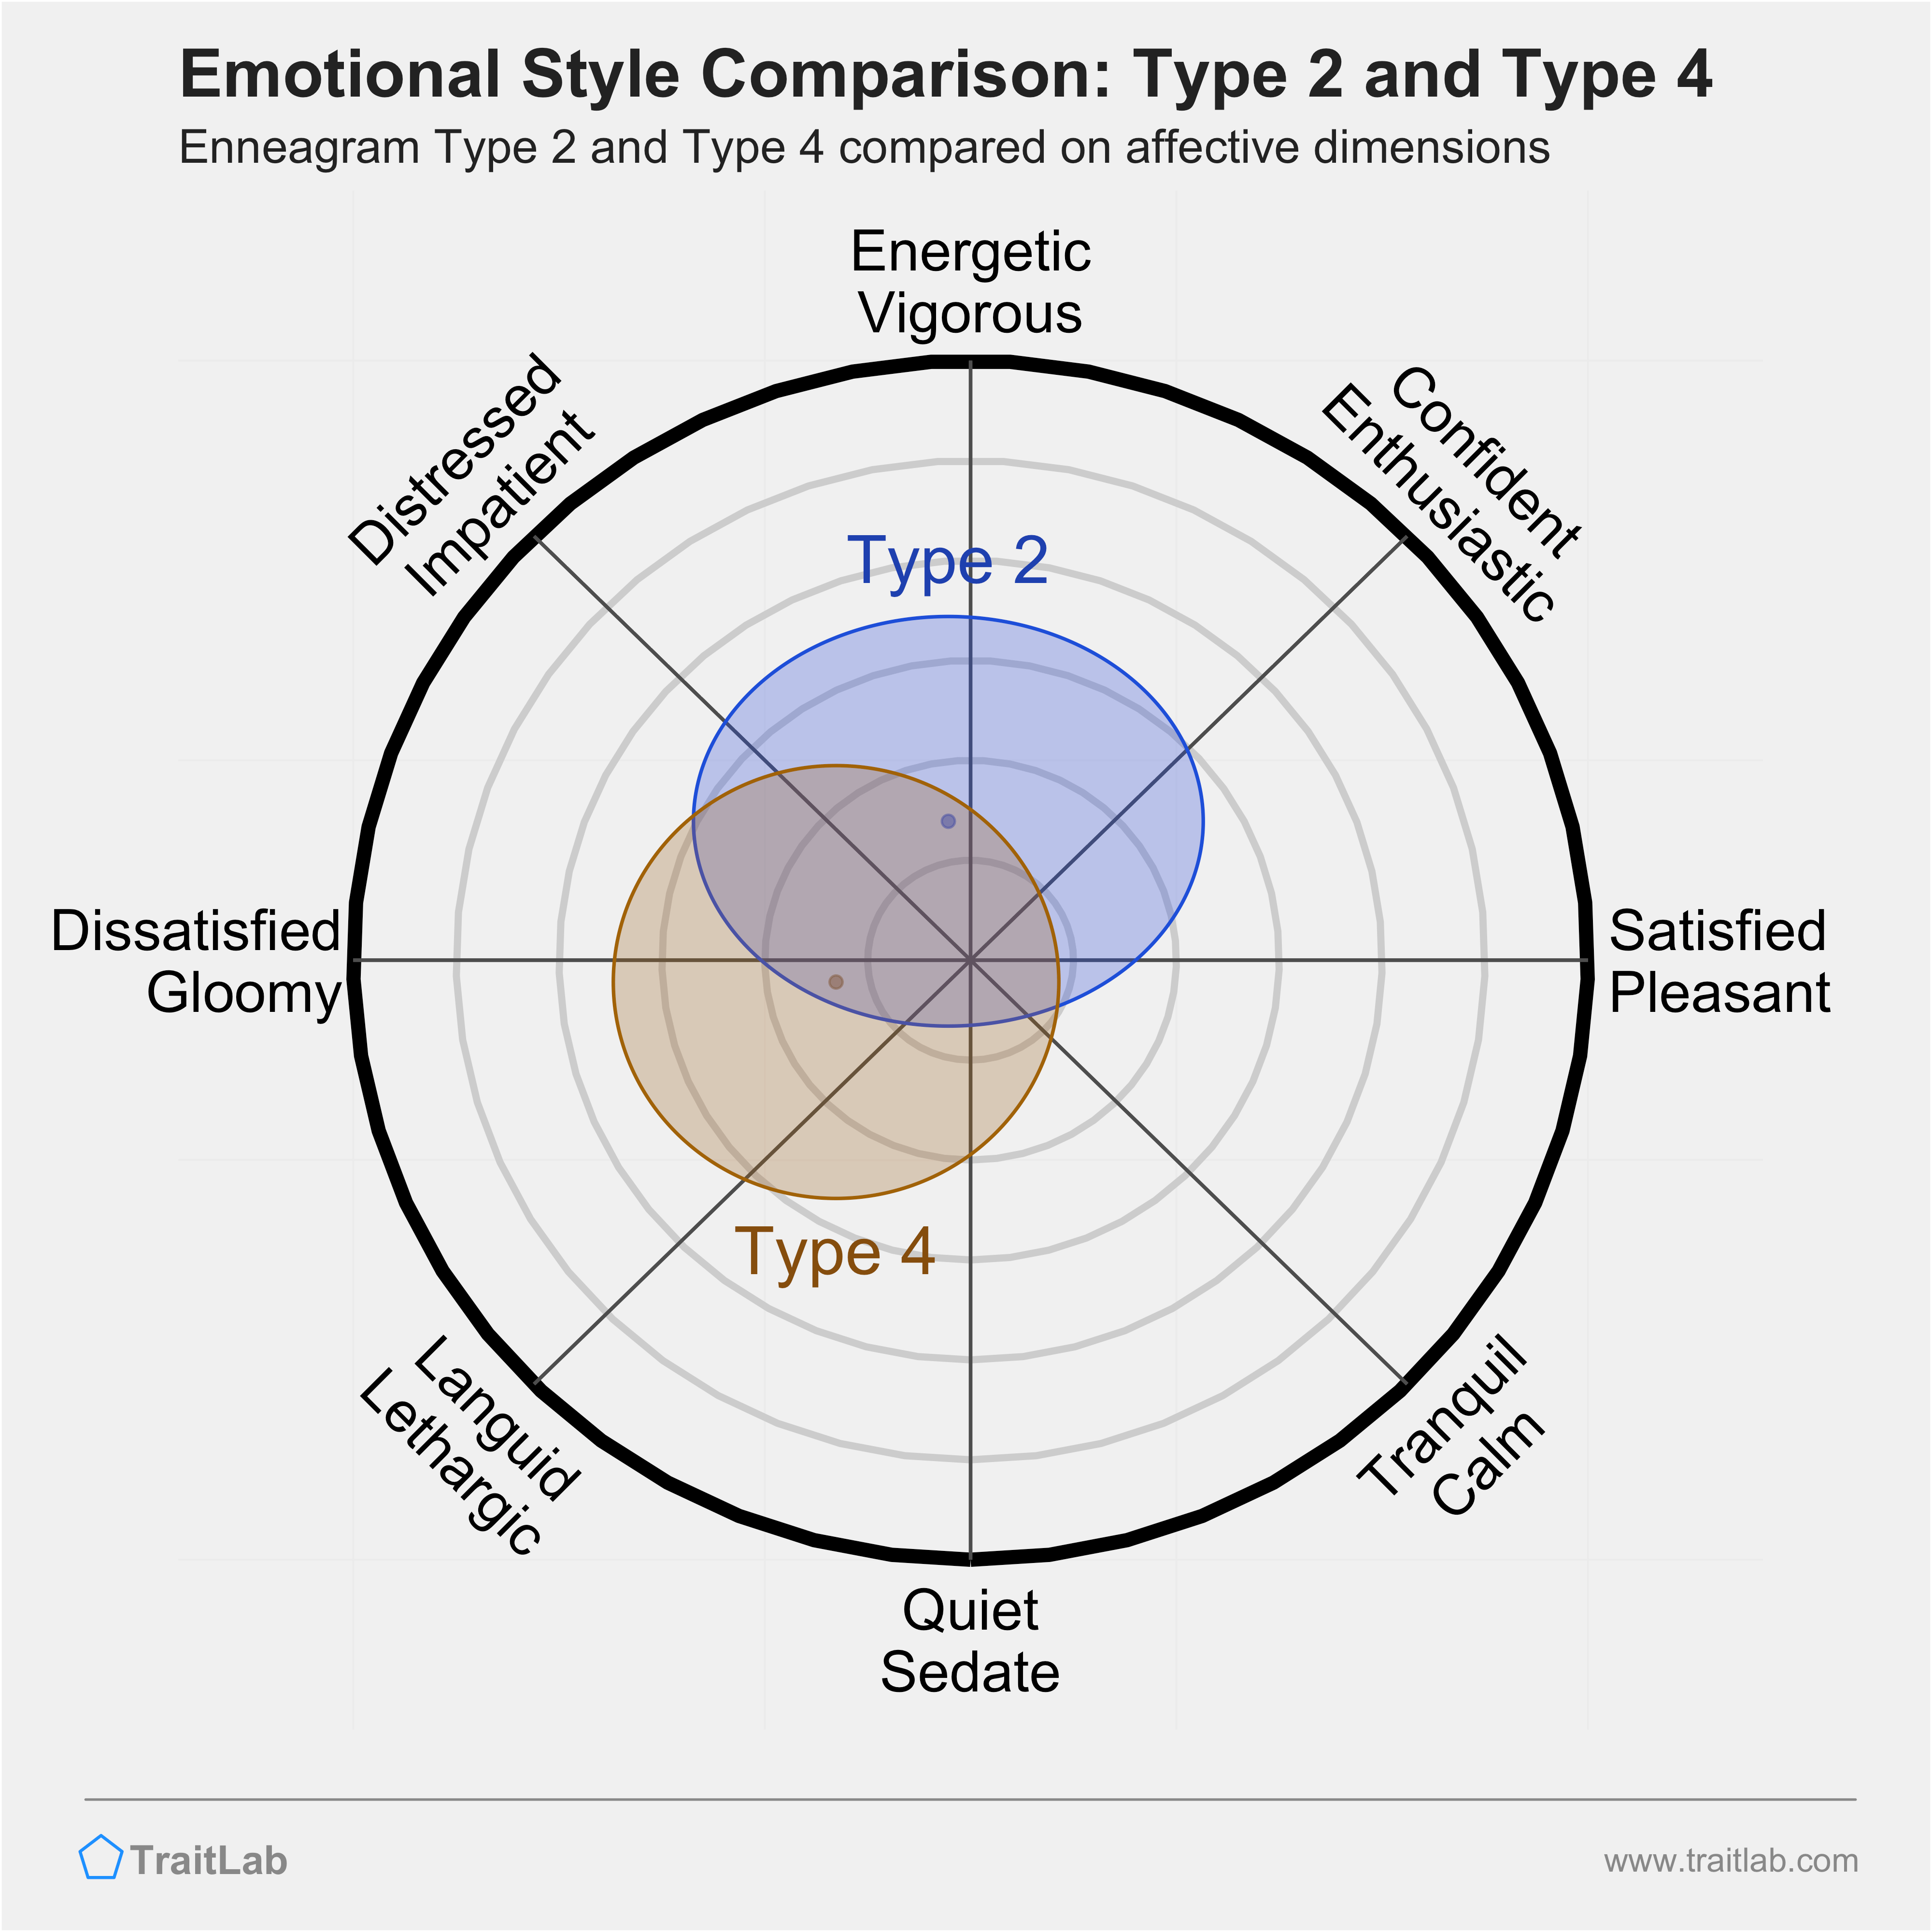 Type 2 and Type 4 comparison across emotional (affective) dimensions